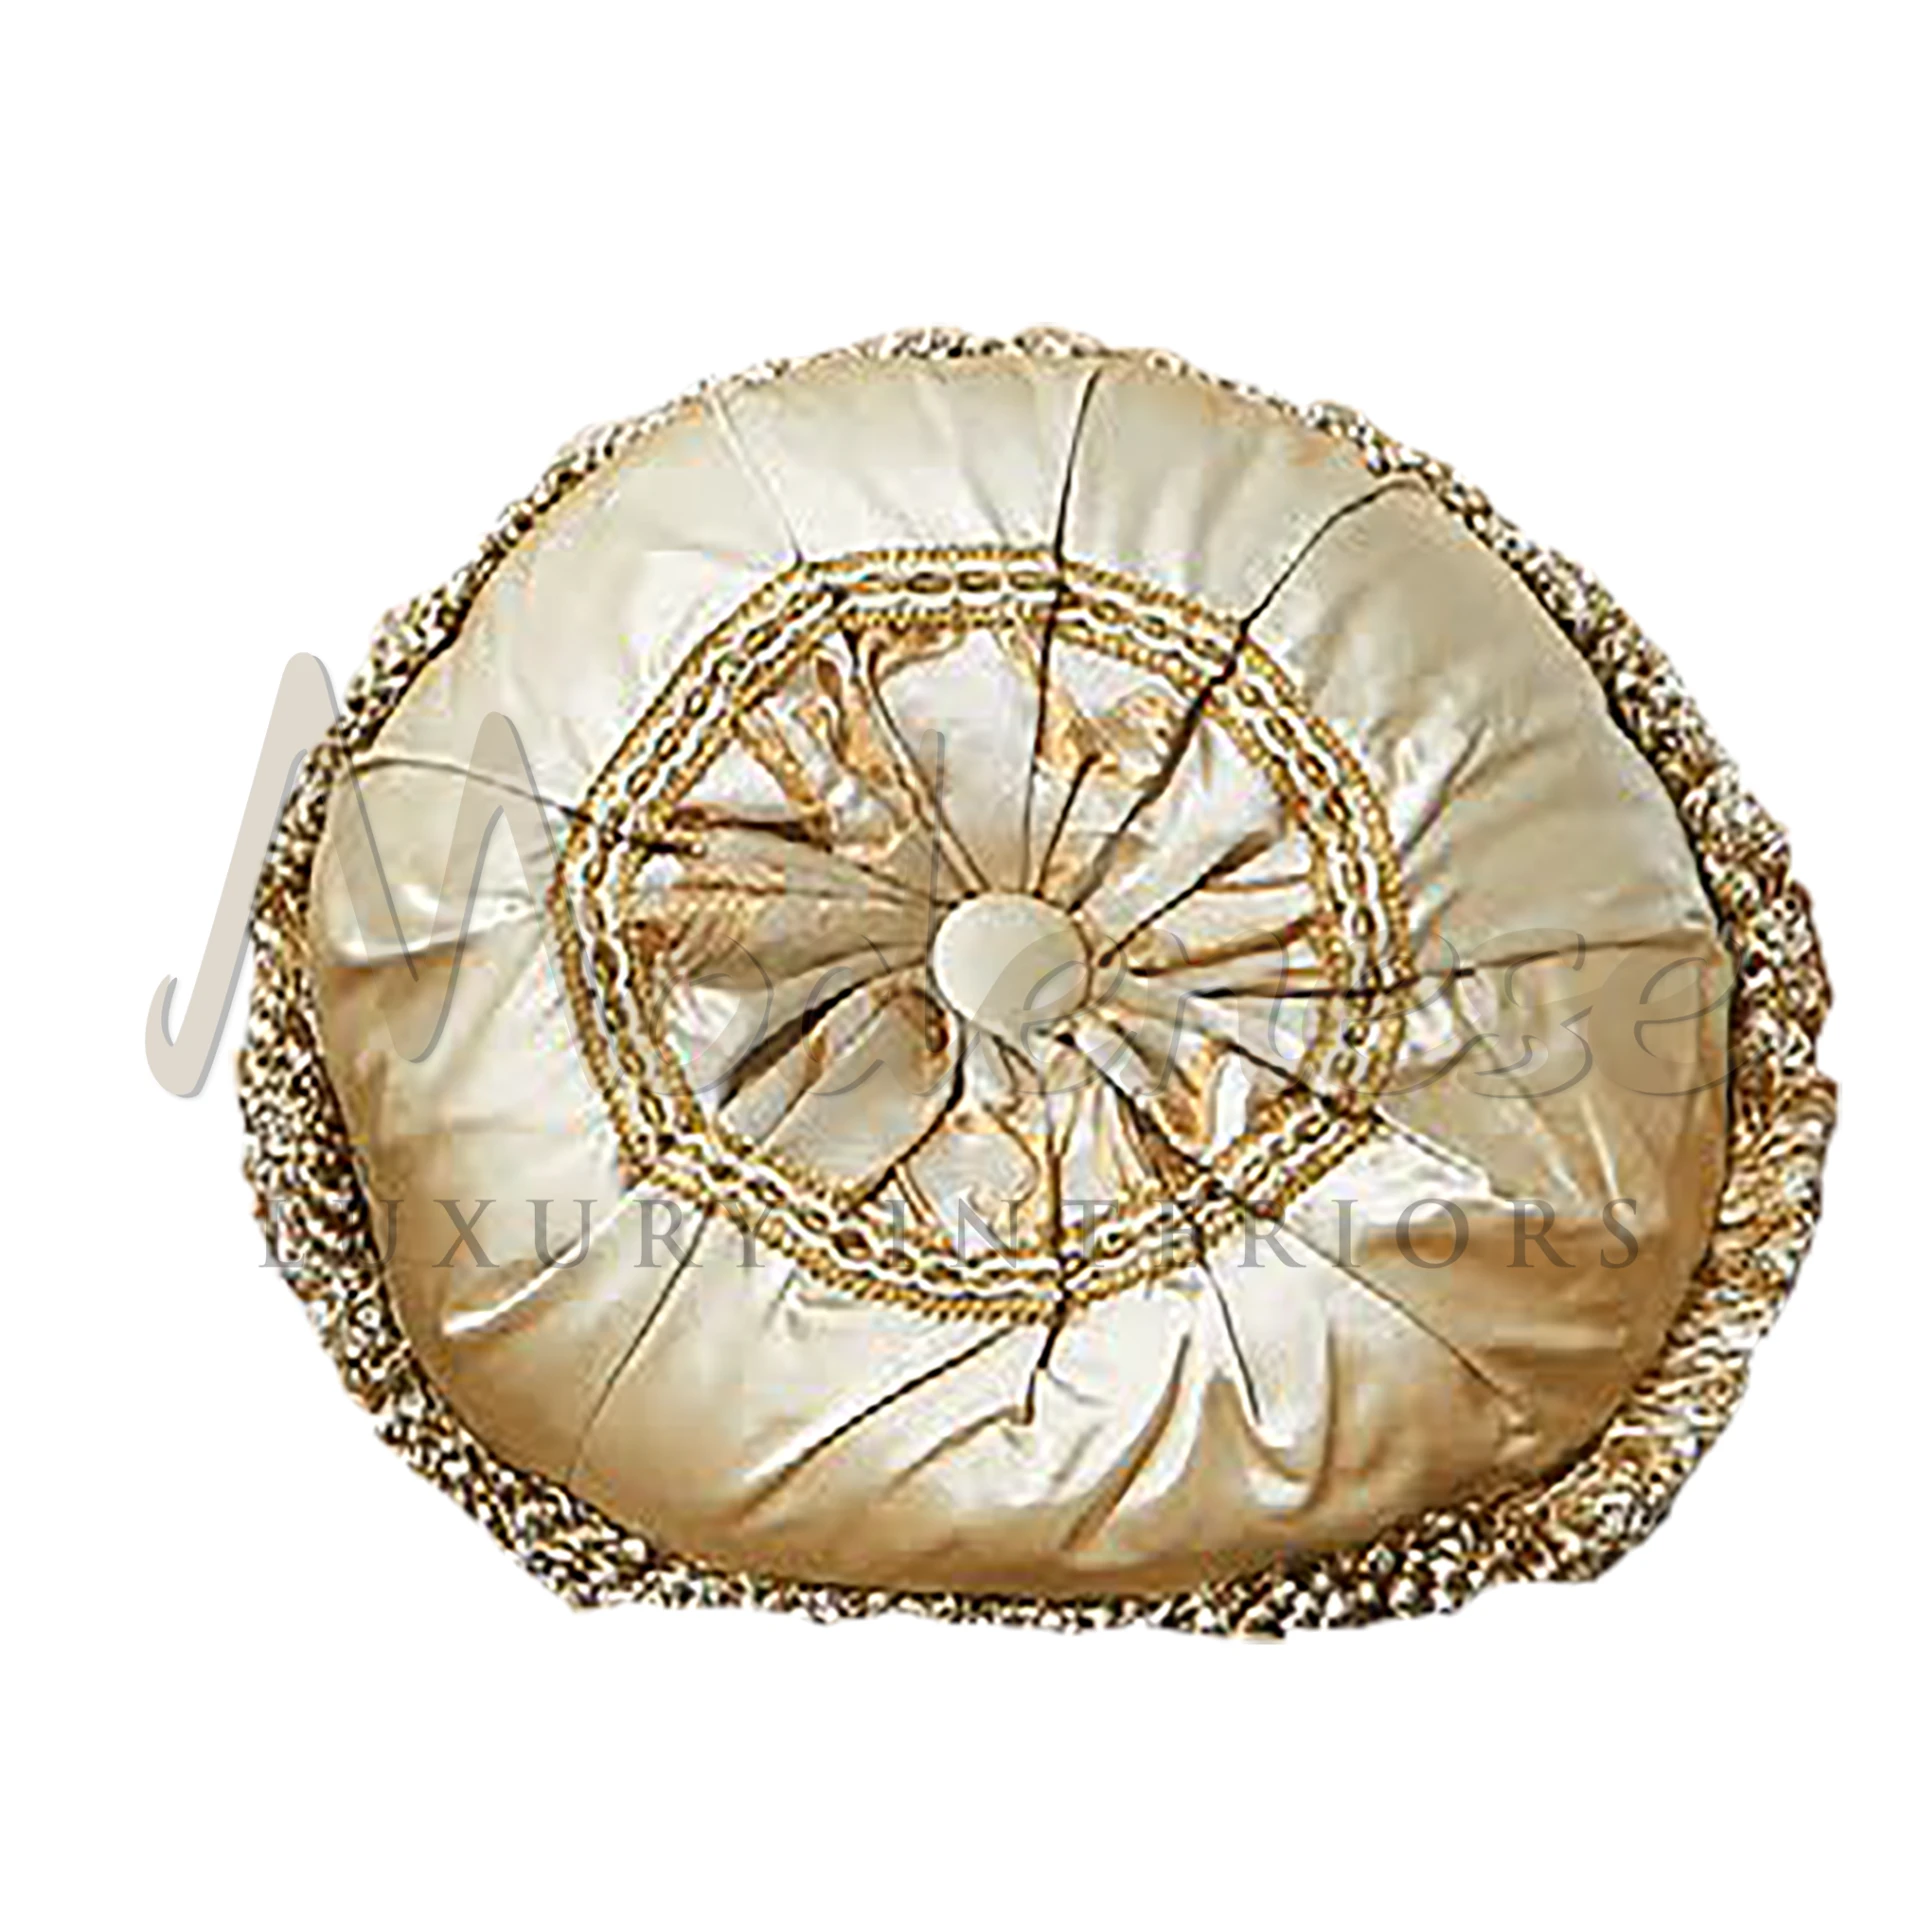 Regal and luxurious Queen's Pillow, designed for royalty with supreme comfort and premium made-in-Italy textiles.